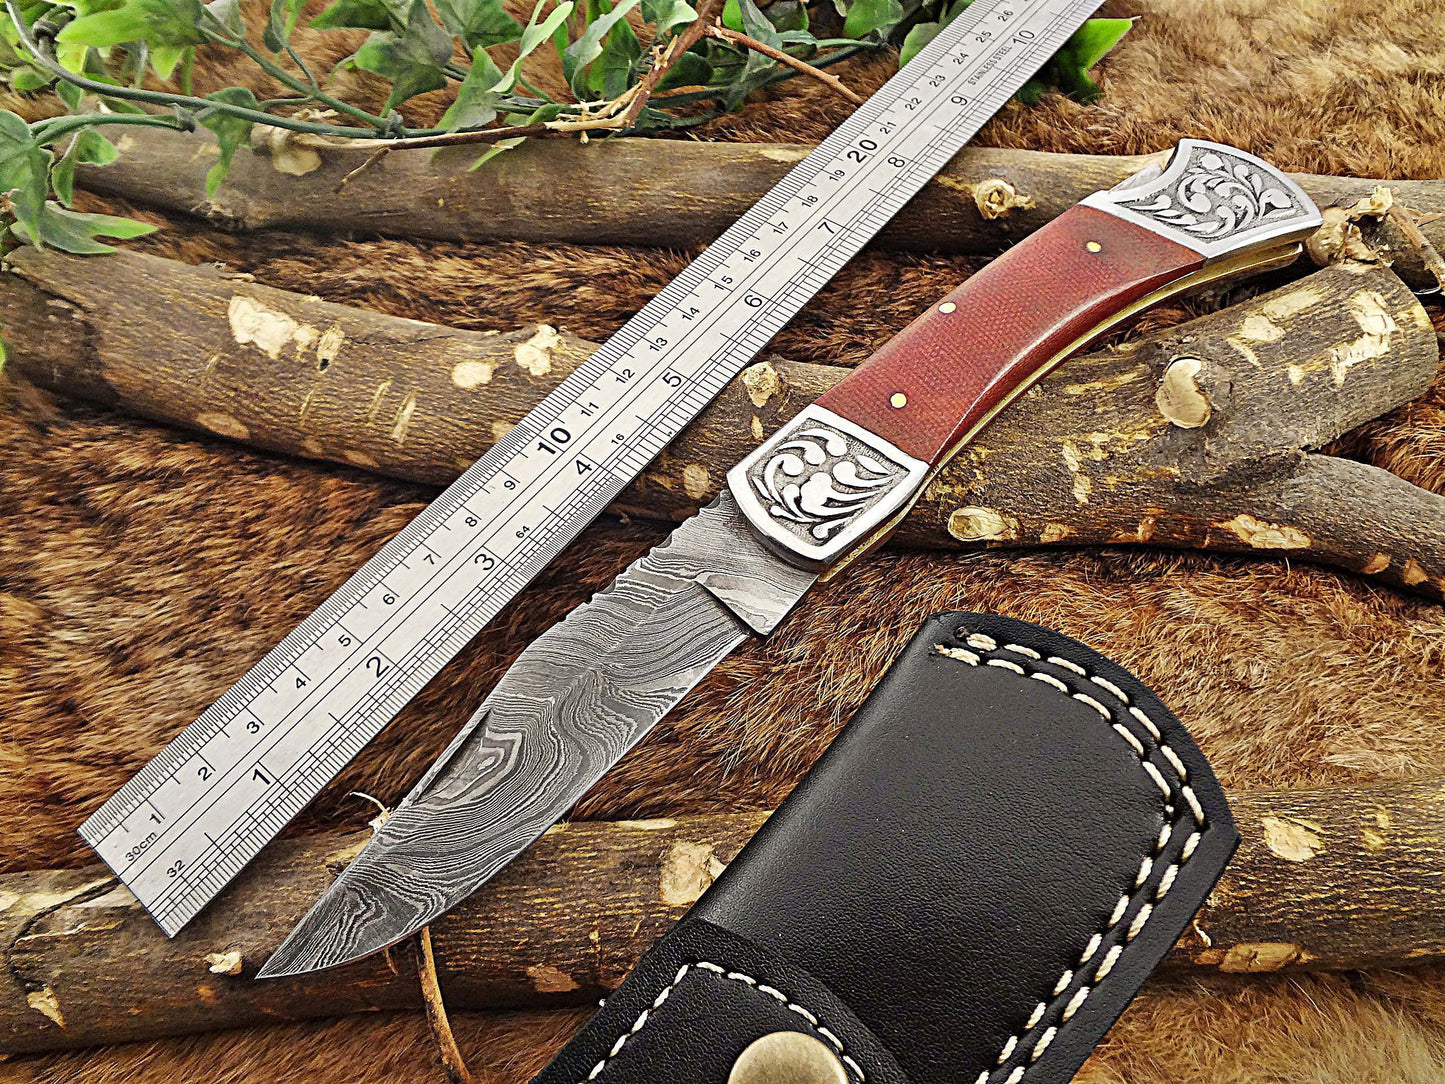 Micarta wood Scale with Engraved steel bolster Damascus steel 9" long Folding Knife custom made 4" Hand Forged blade cow hide leather sheath